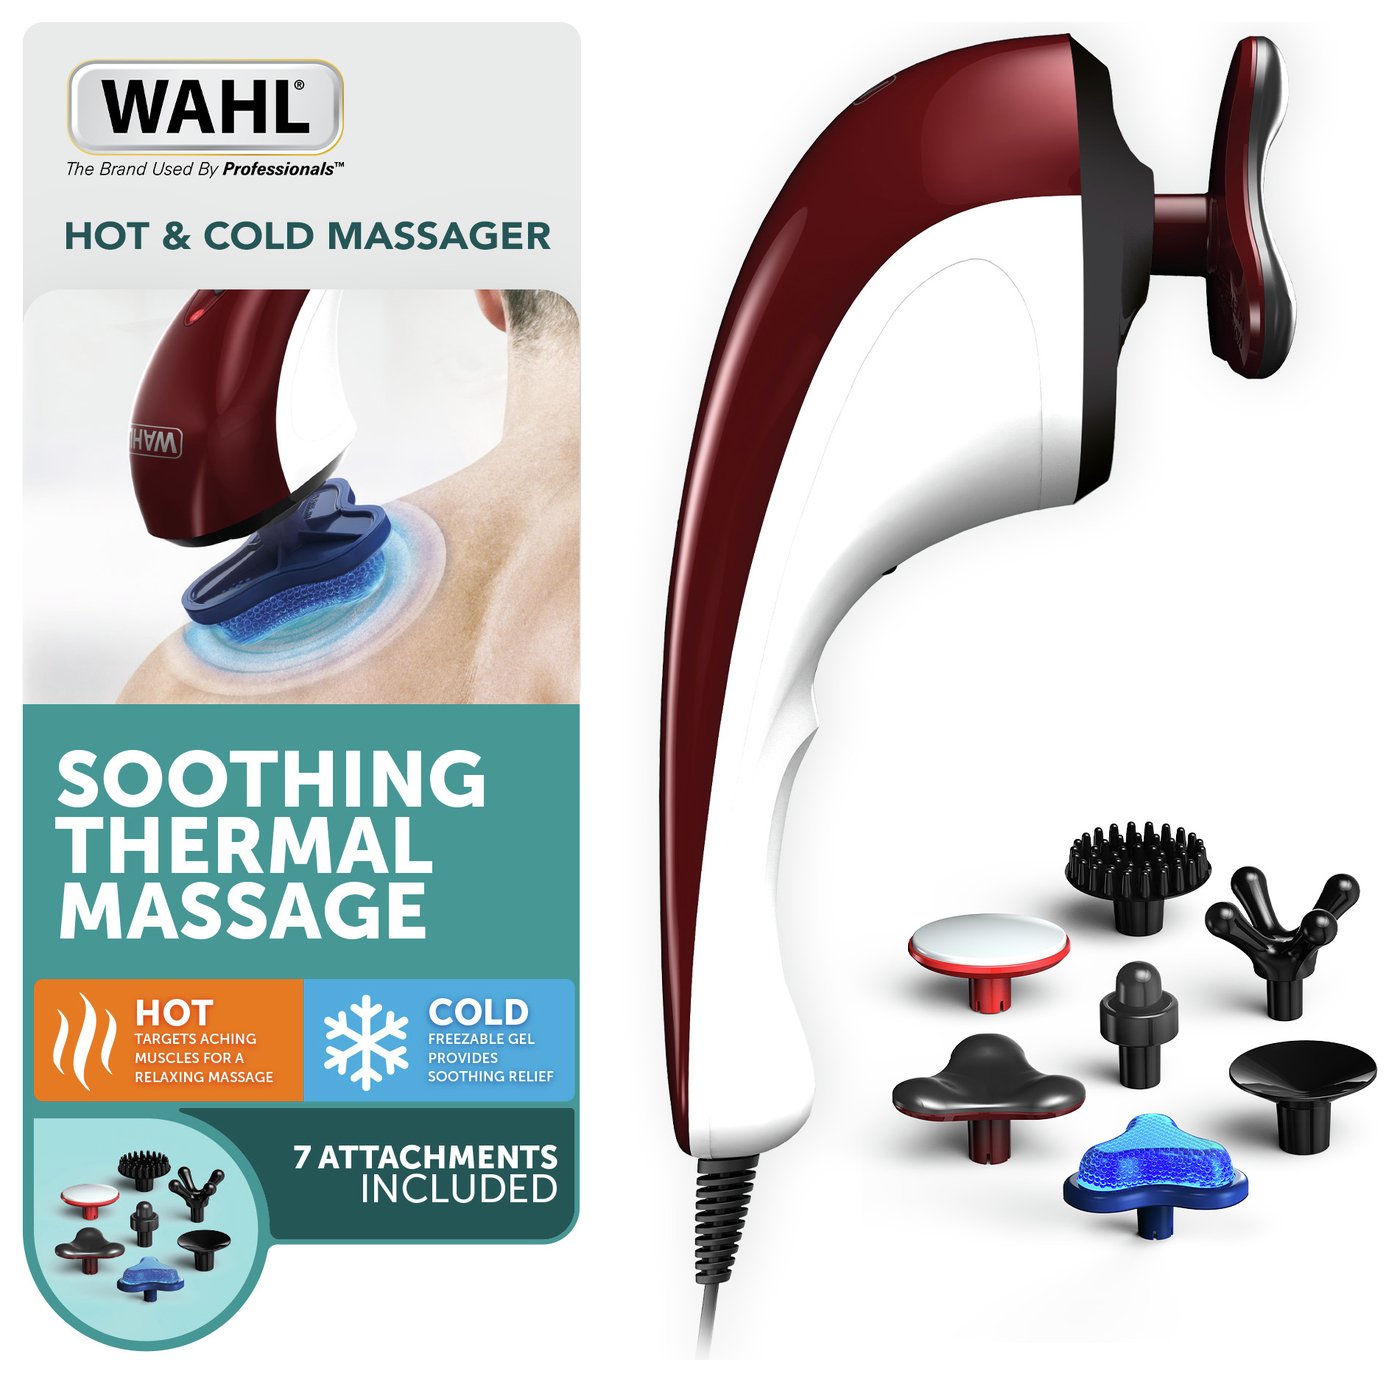 Wahl Hot & Cold Soothing Thermal Massager